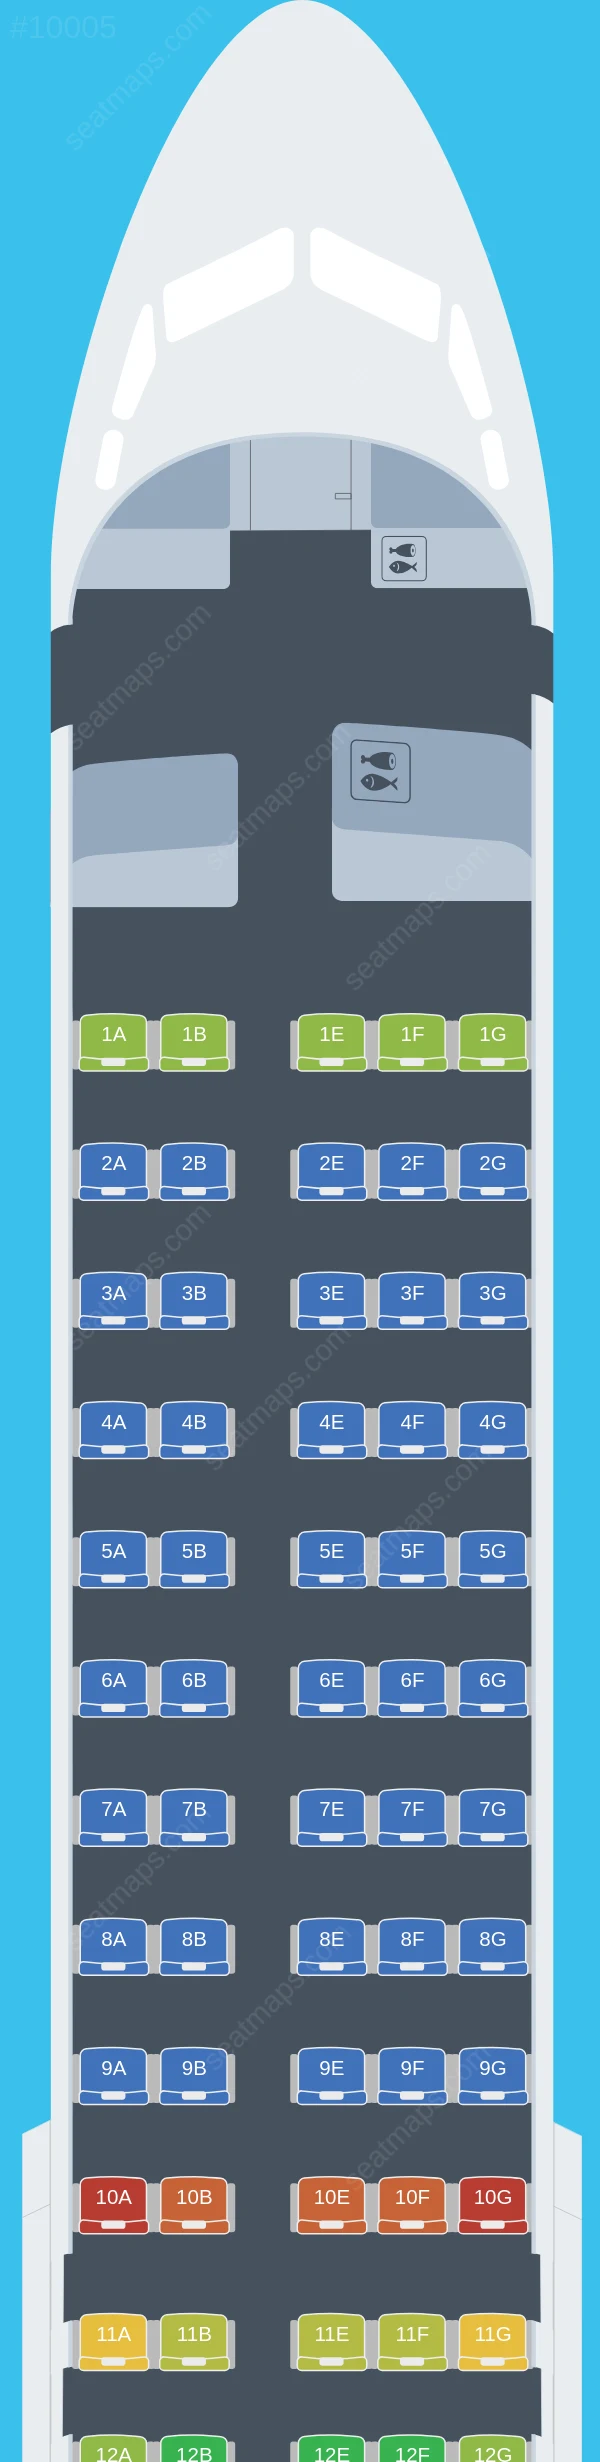 Airnorth Fokker 100 seatmap preview